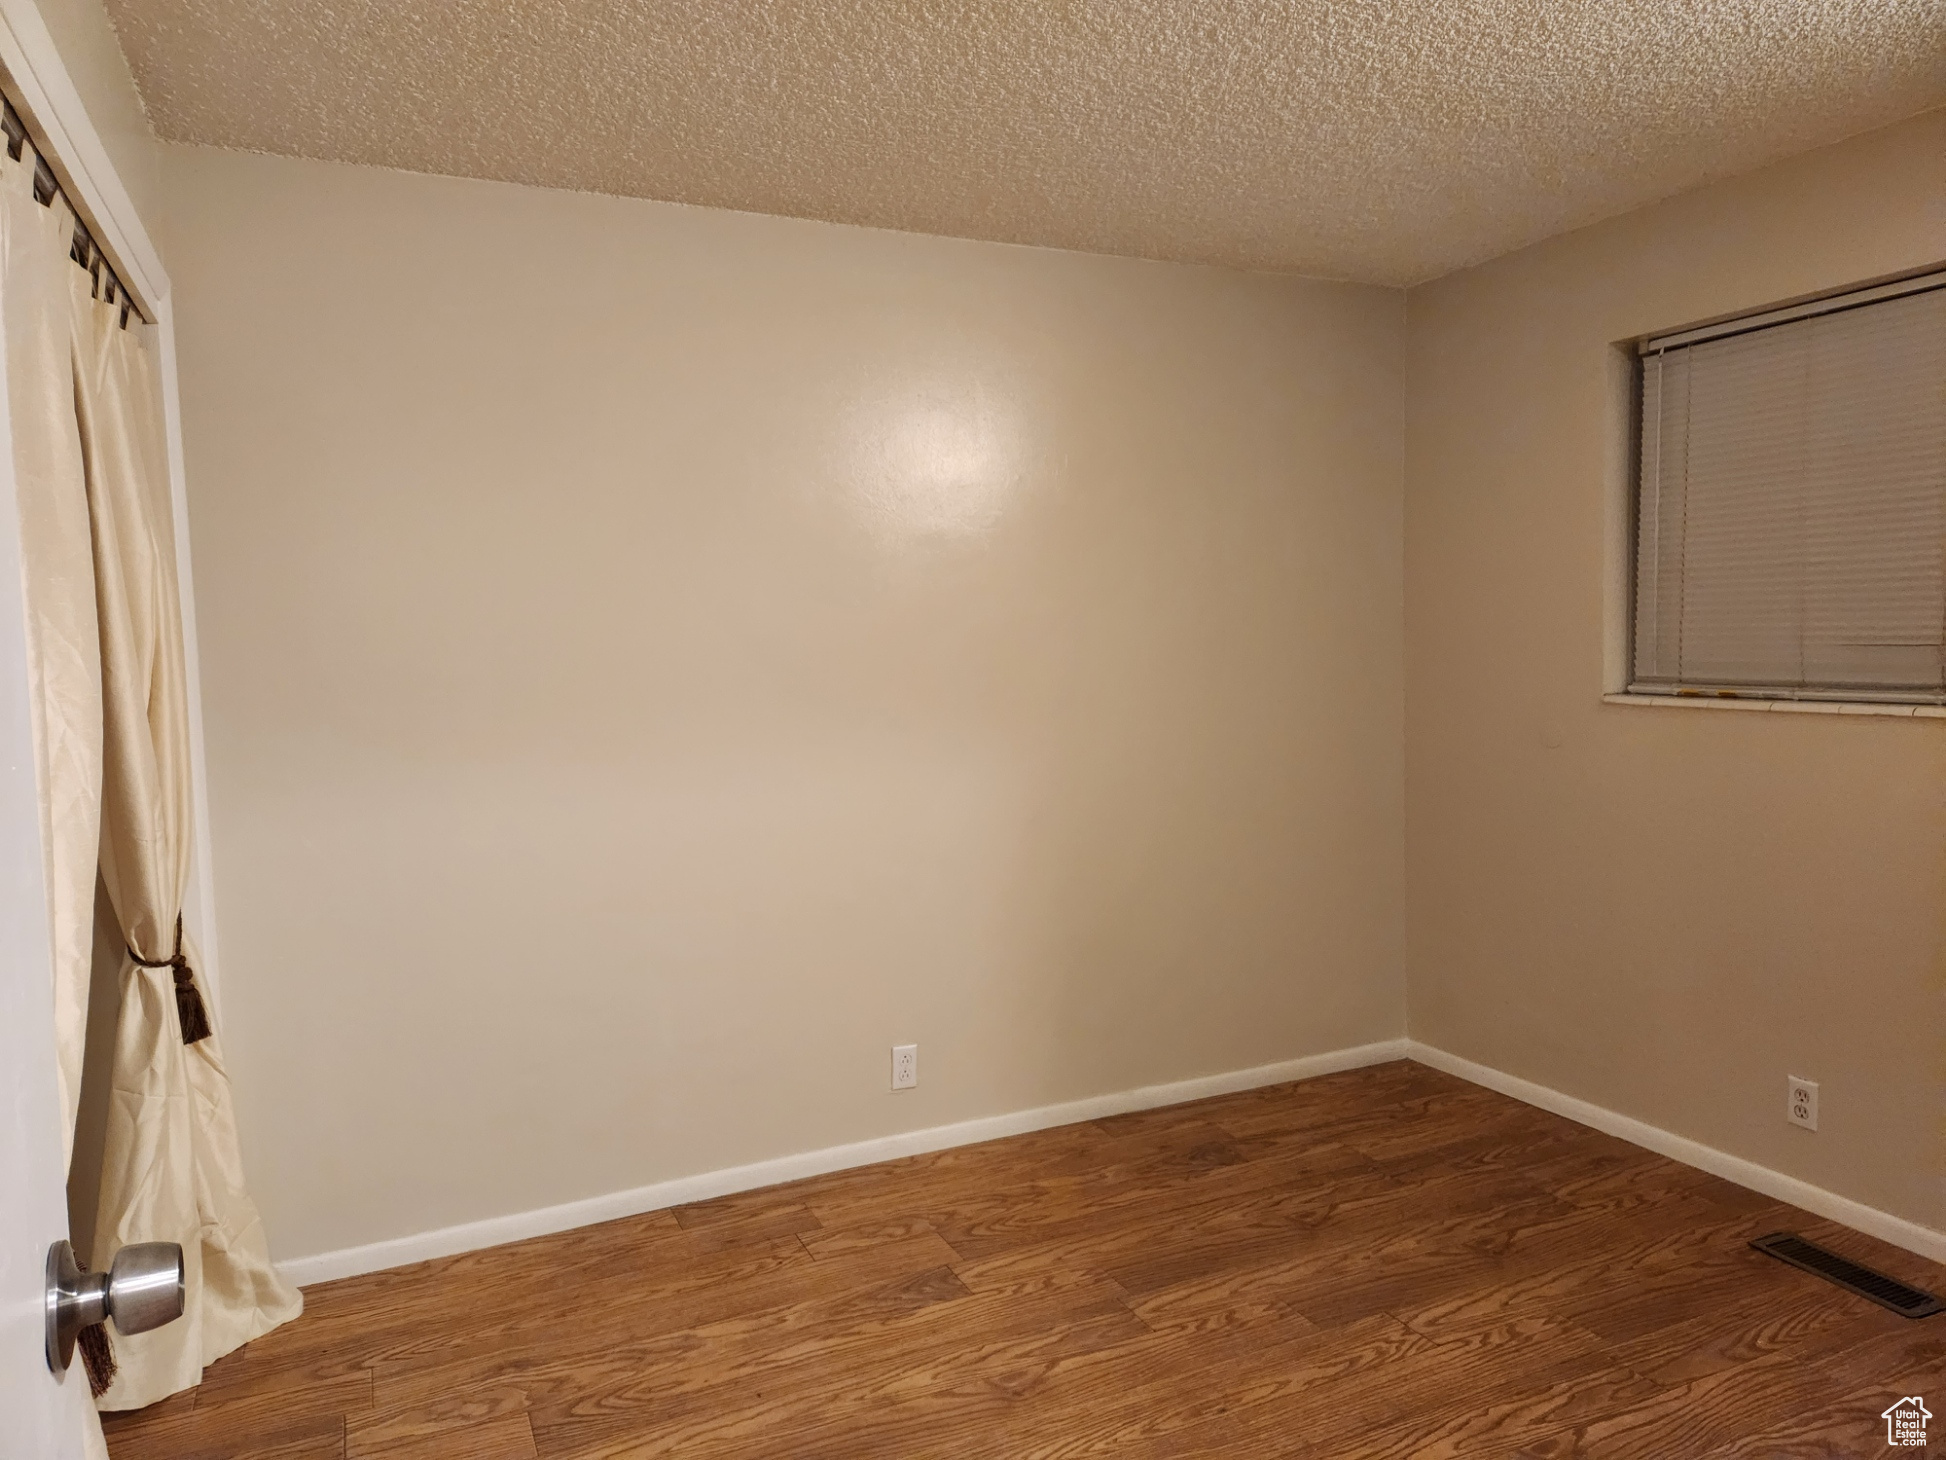 Spare room with dark hardwood / wood-style floors and a textured ceiling